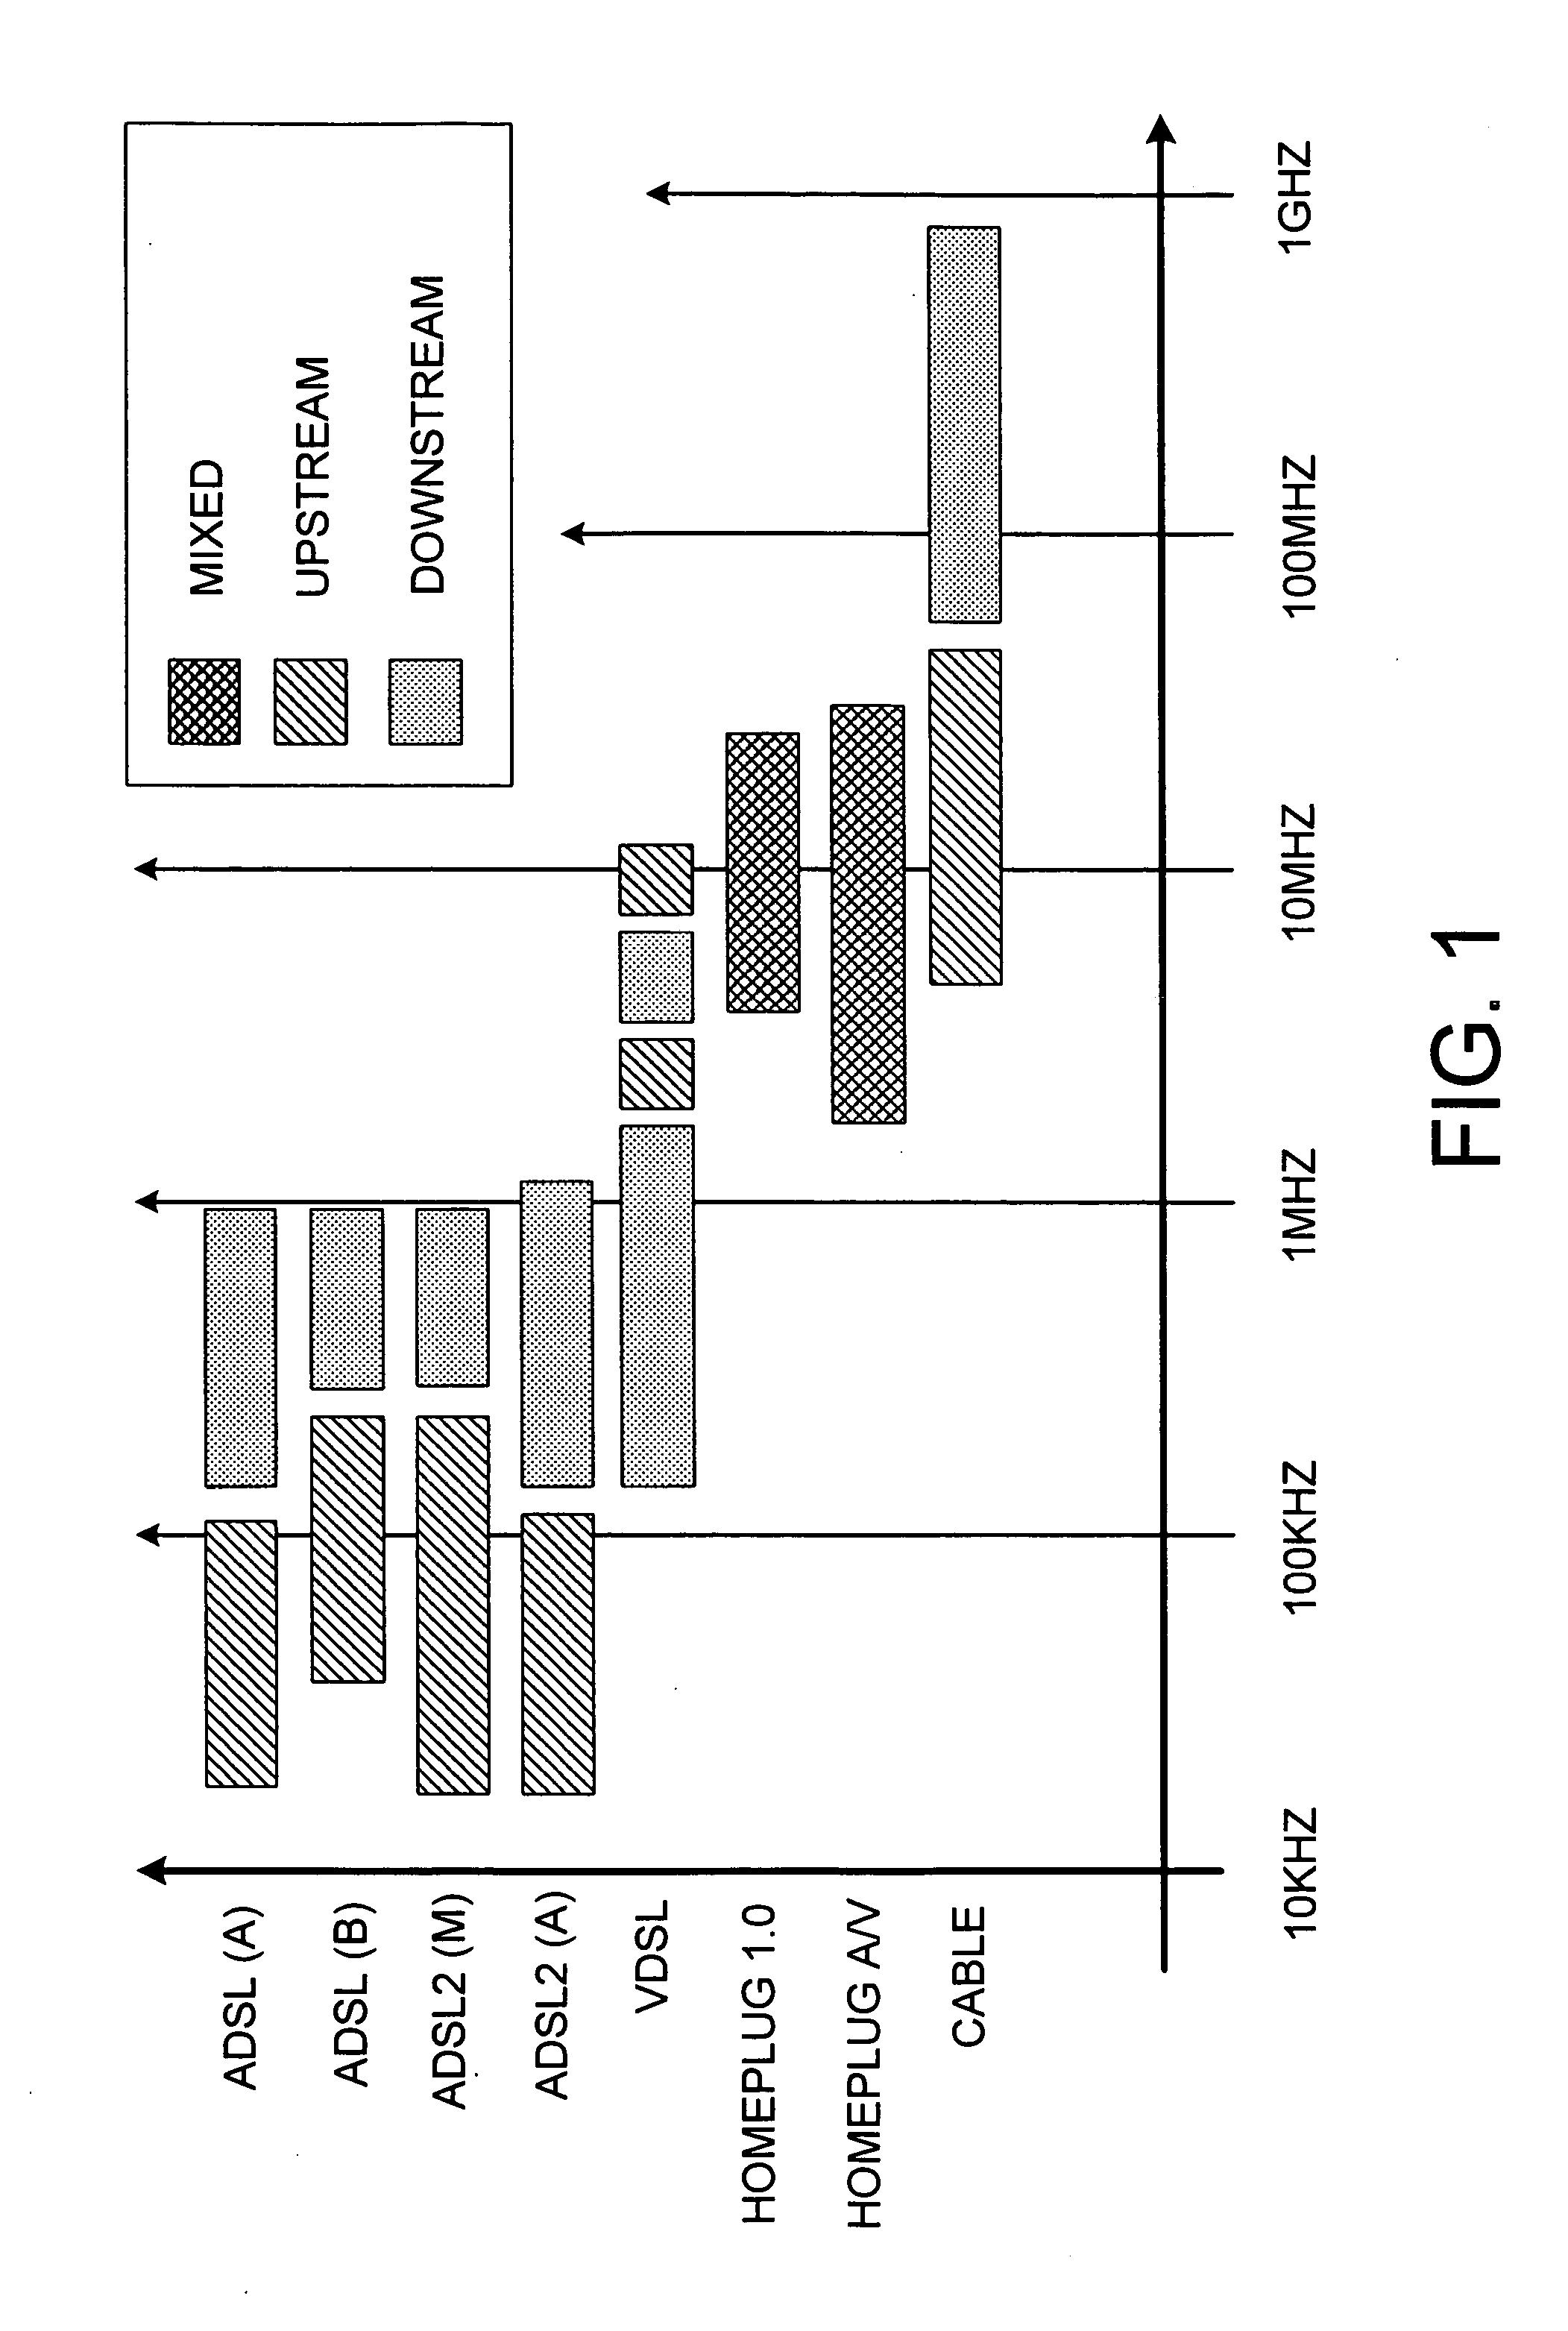 Local area network above cable television methods and devices